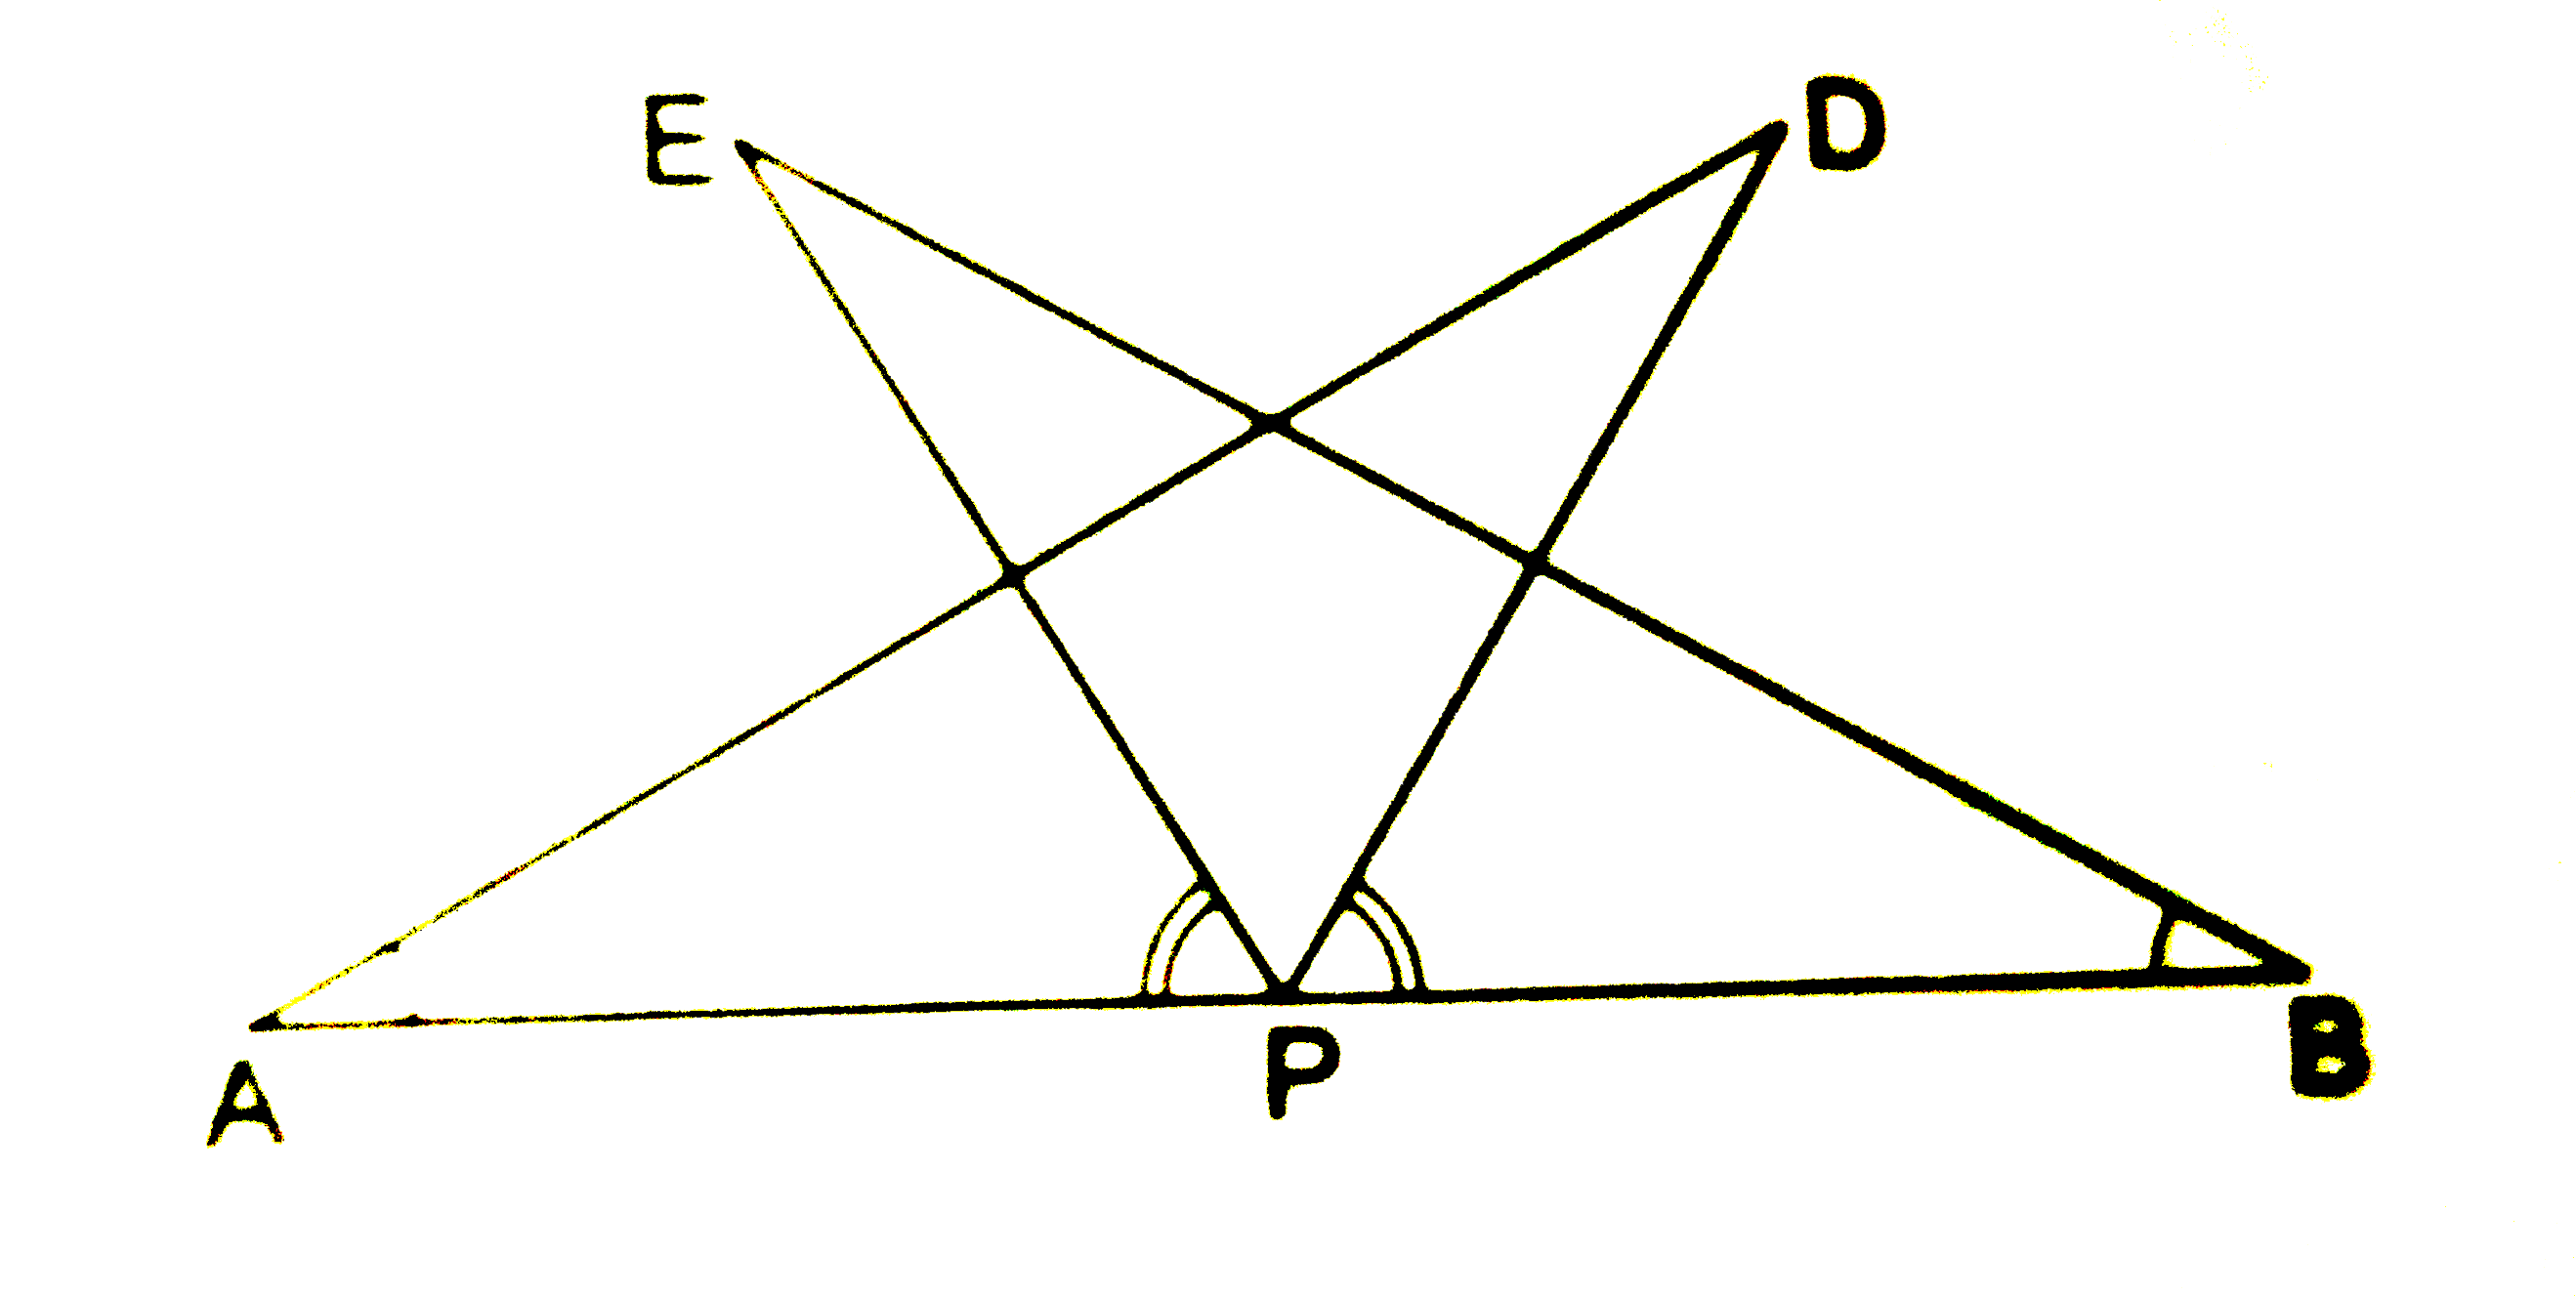 AB is a line segment and P is its midpoint. D and E are points on the same side of AP such that angleBAD=angleABE and angleEPA=angleDPB.   Show that (i) DeltaDAP~=DeltaEBP,   (ii) AD=BE.